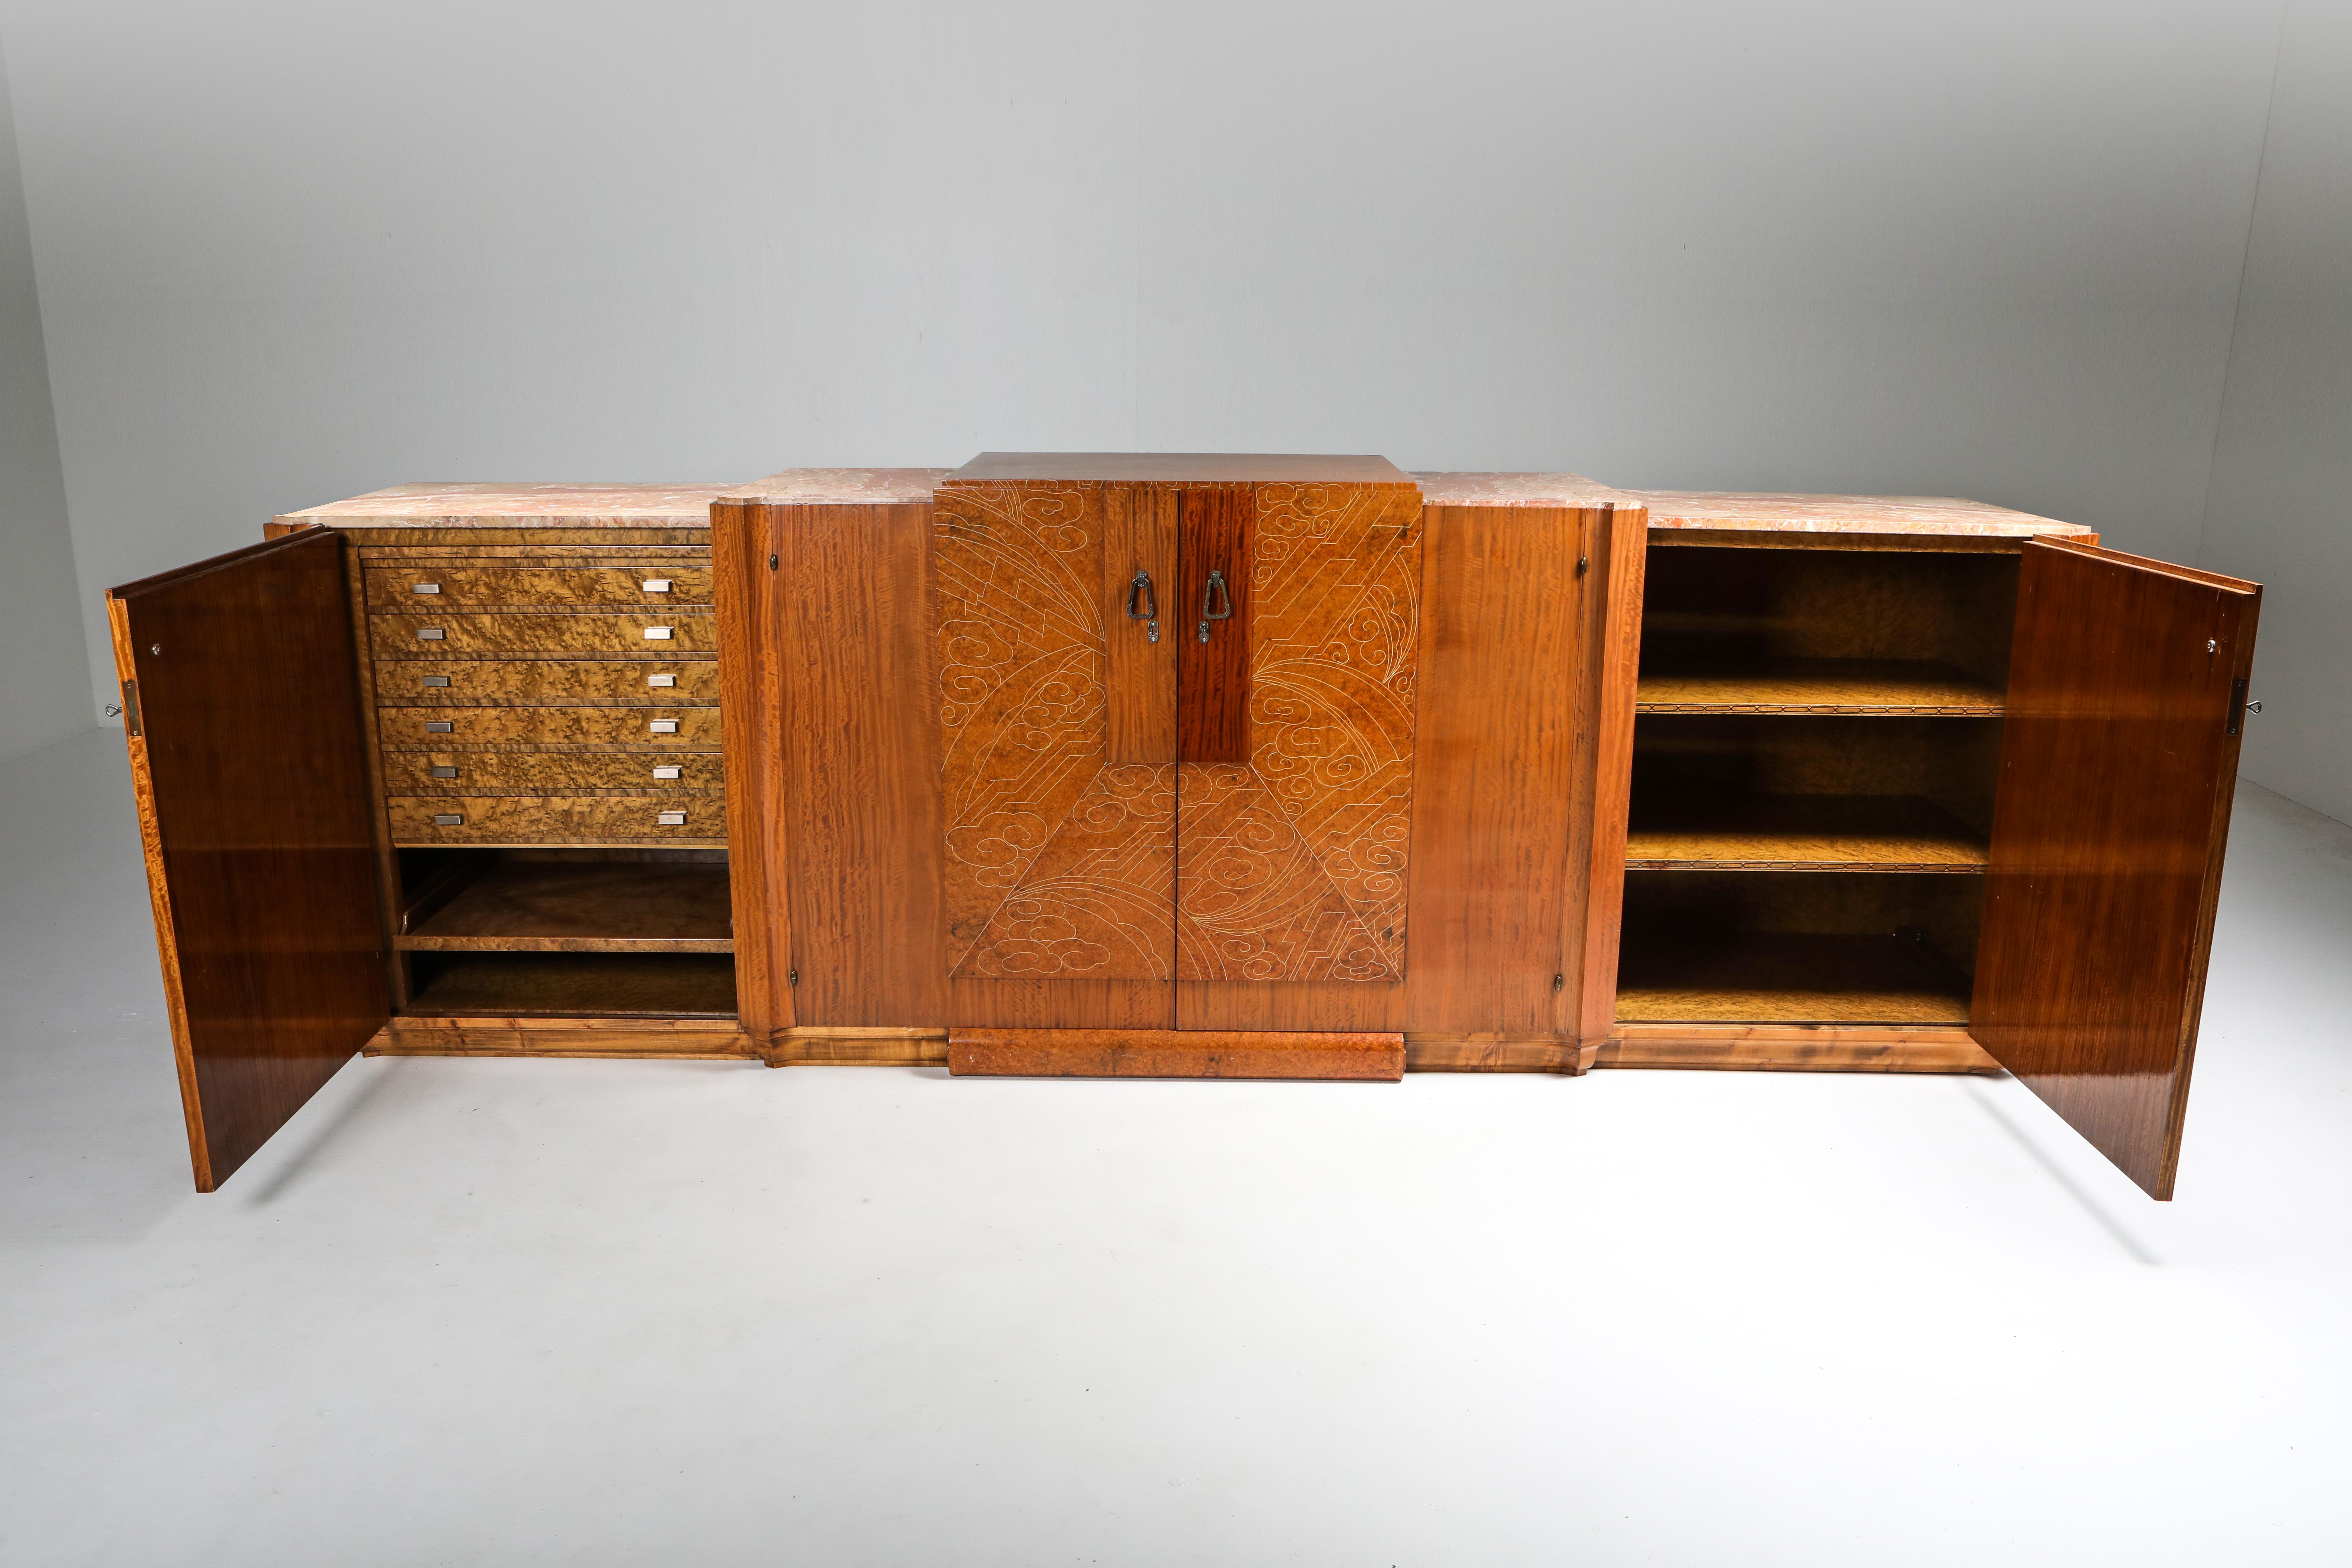 Art Deco High-End Credenza, Mahogany, Burl, Loupe D'amboine and Marble, 1930's For Sale 4